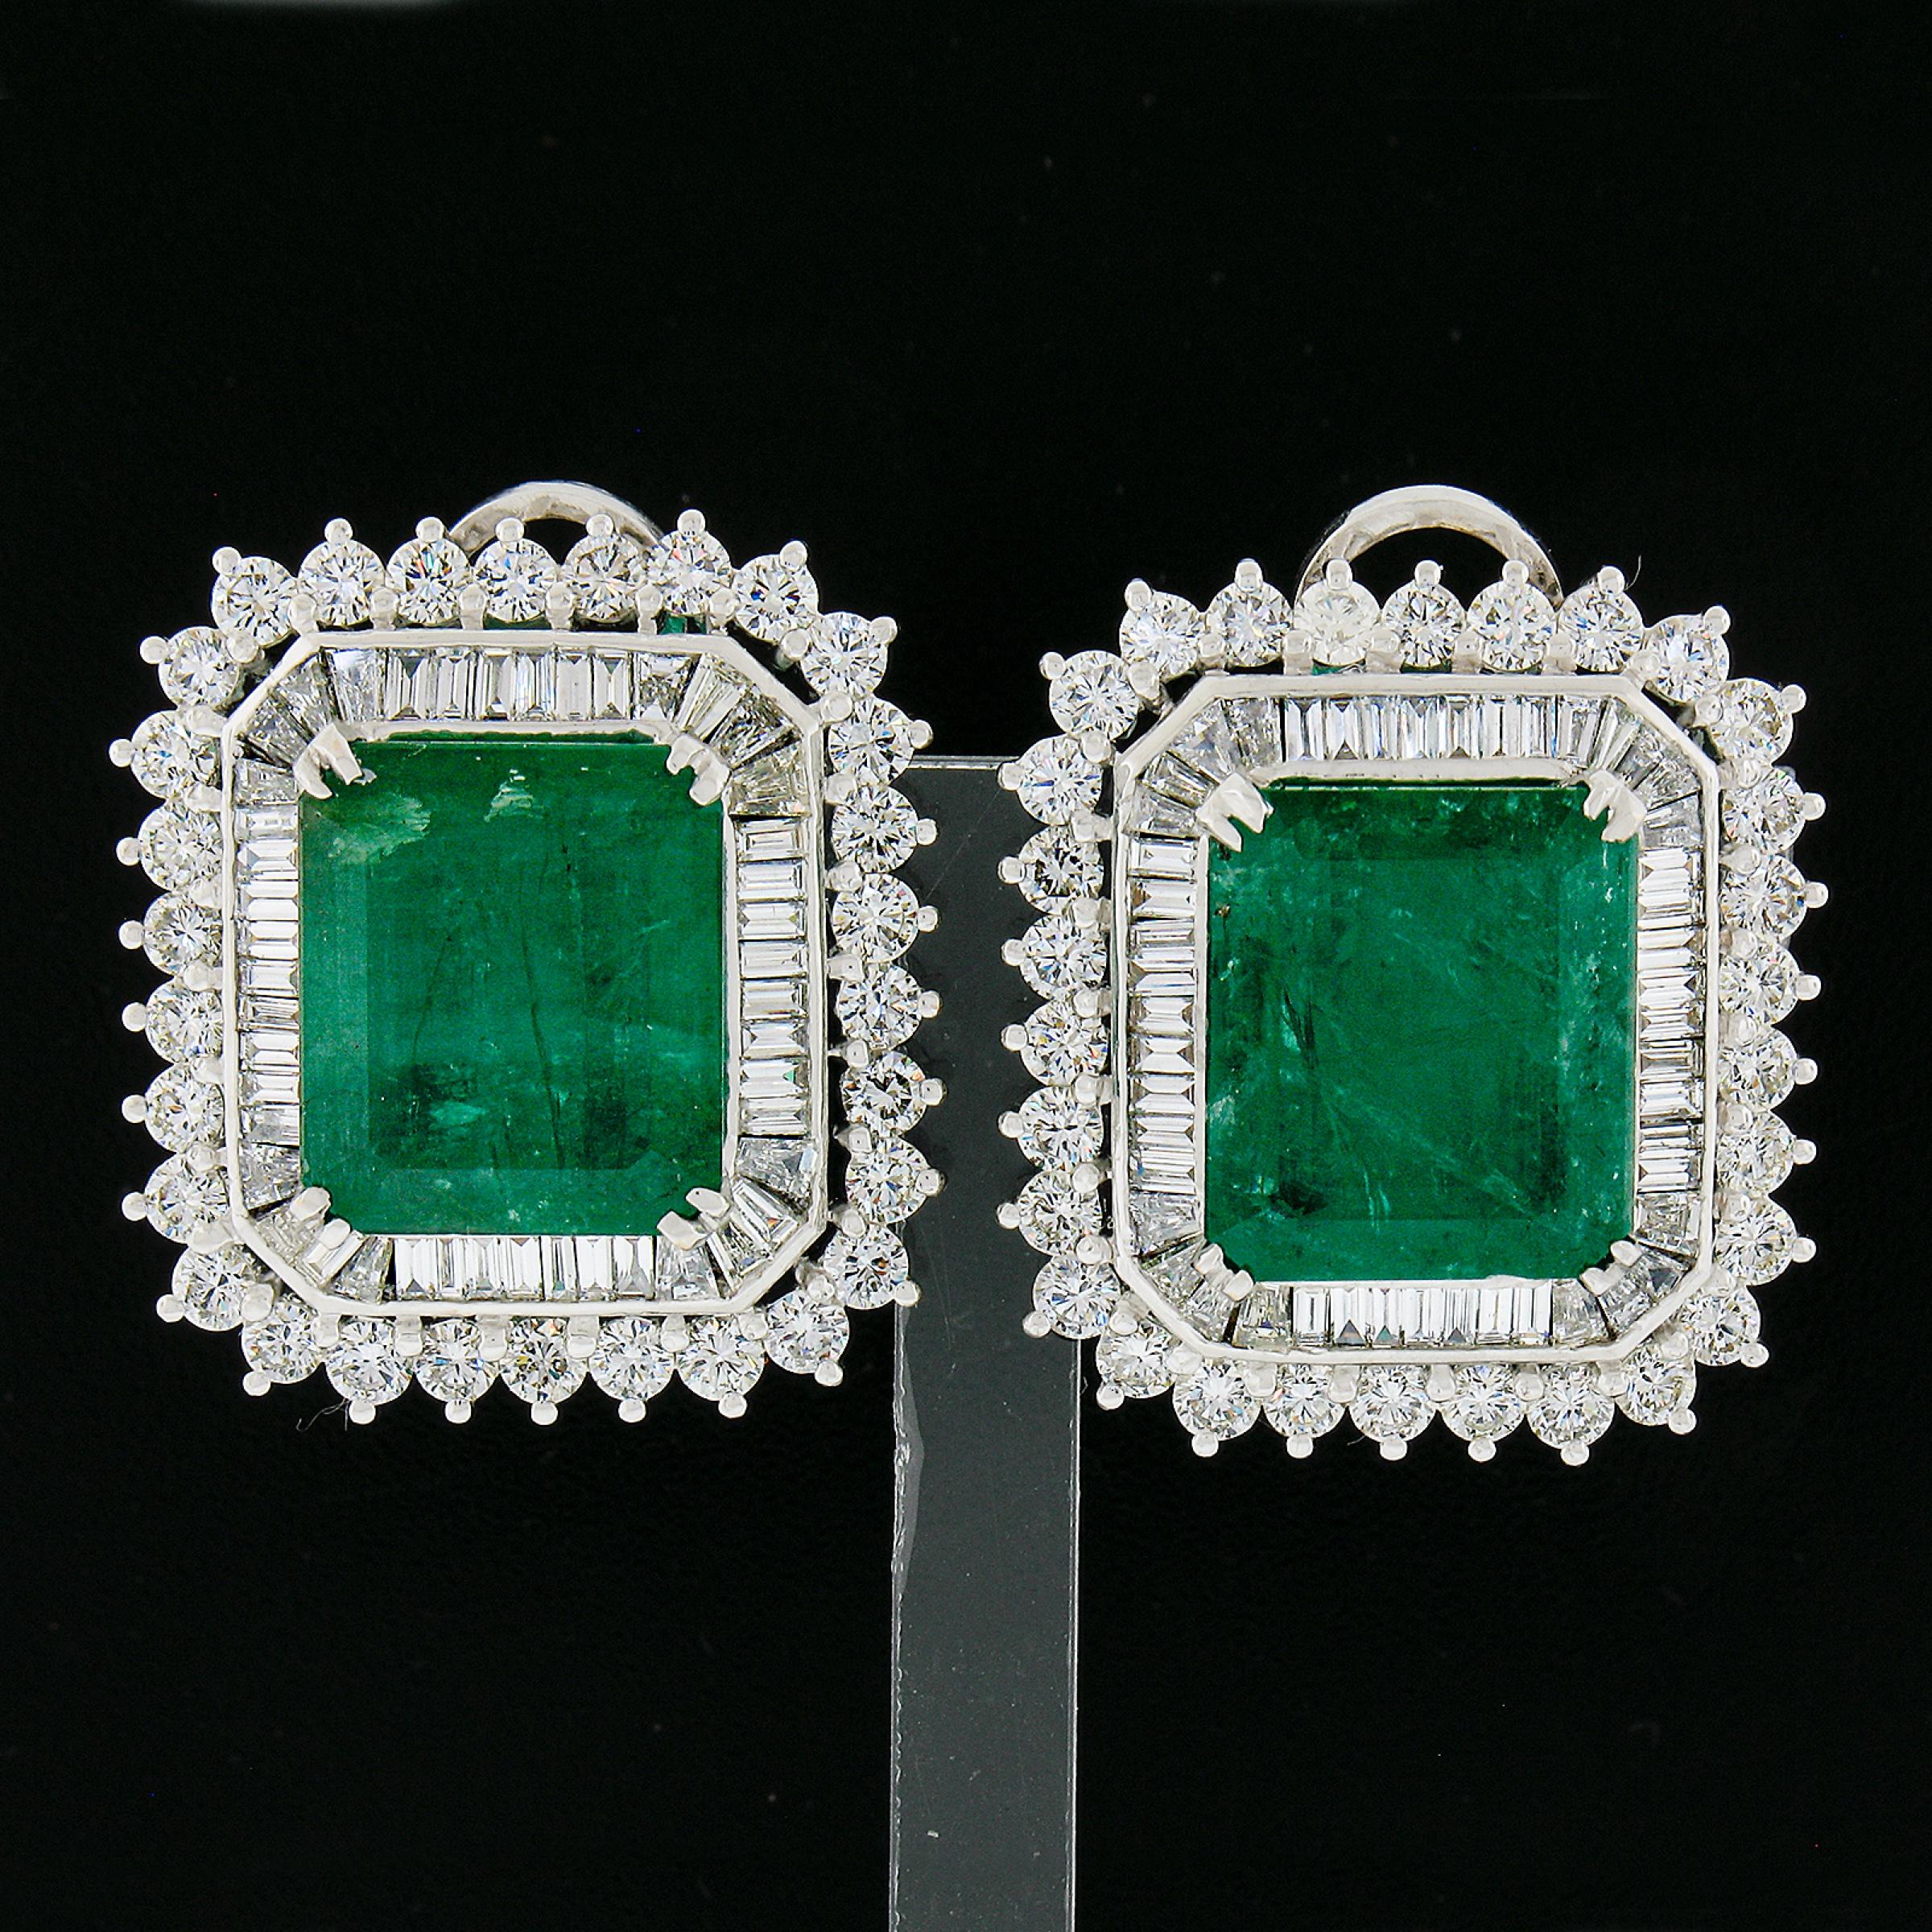 This substantial and large pair of vintage earrings features two large, GIA certified, octagonal step cut emeralds in which together total approximately an incredible 18-20 carats in weight. These stones display an absolutely rich green color that